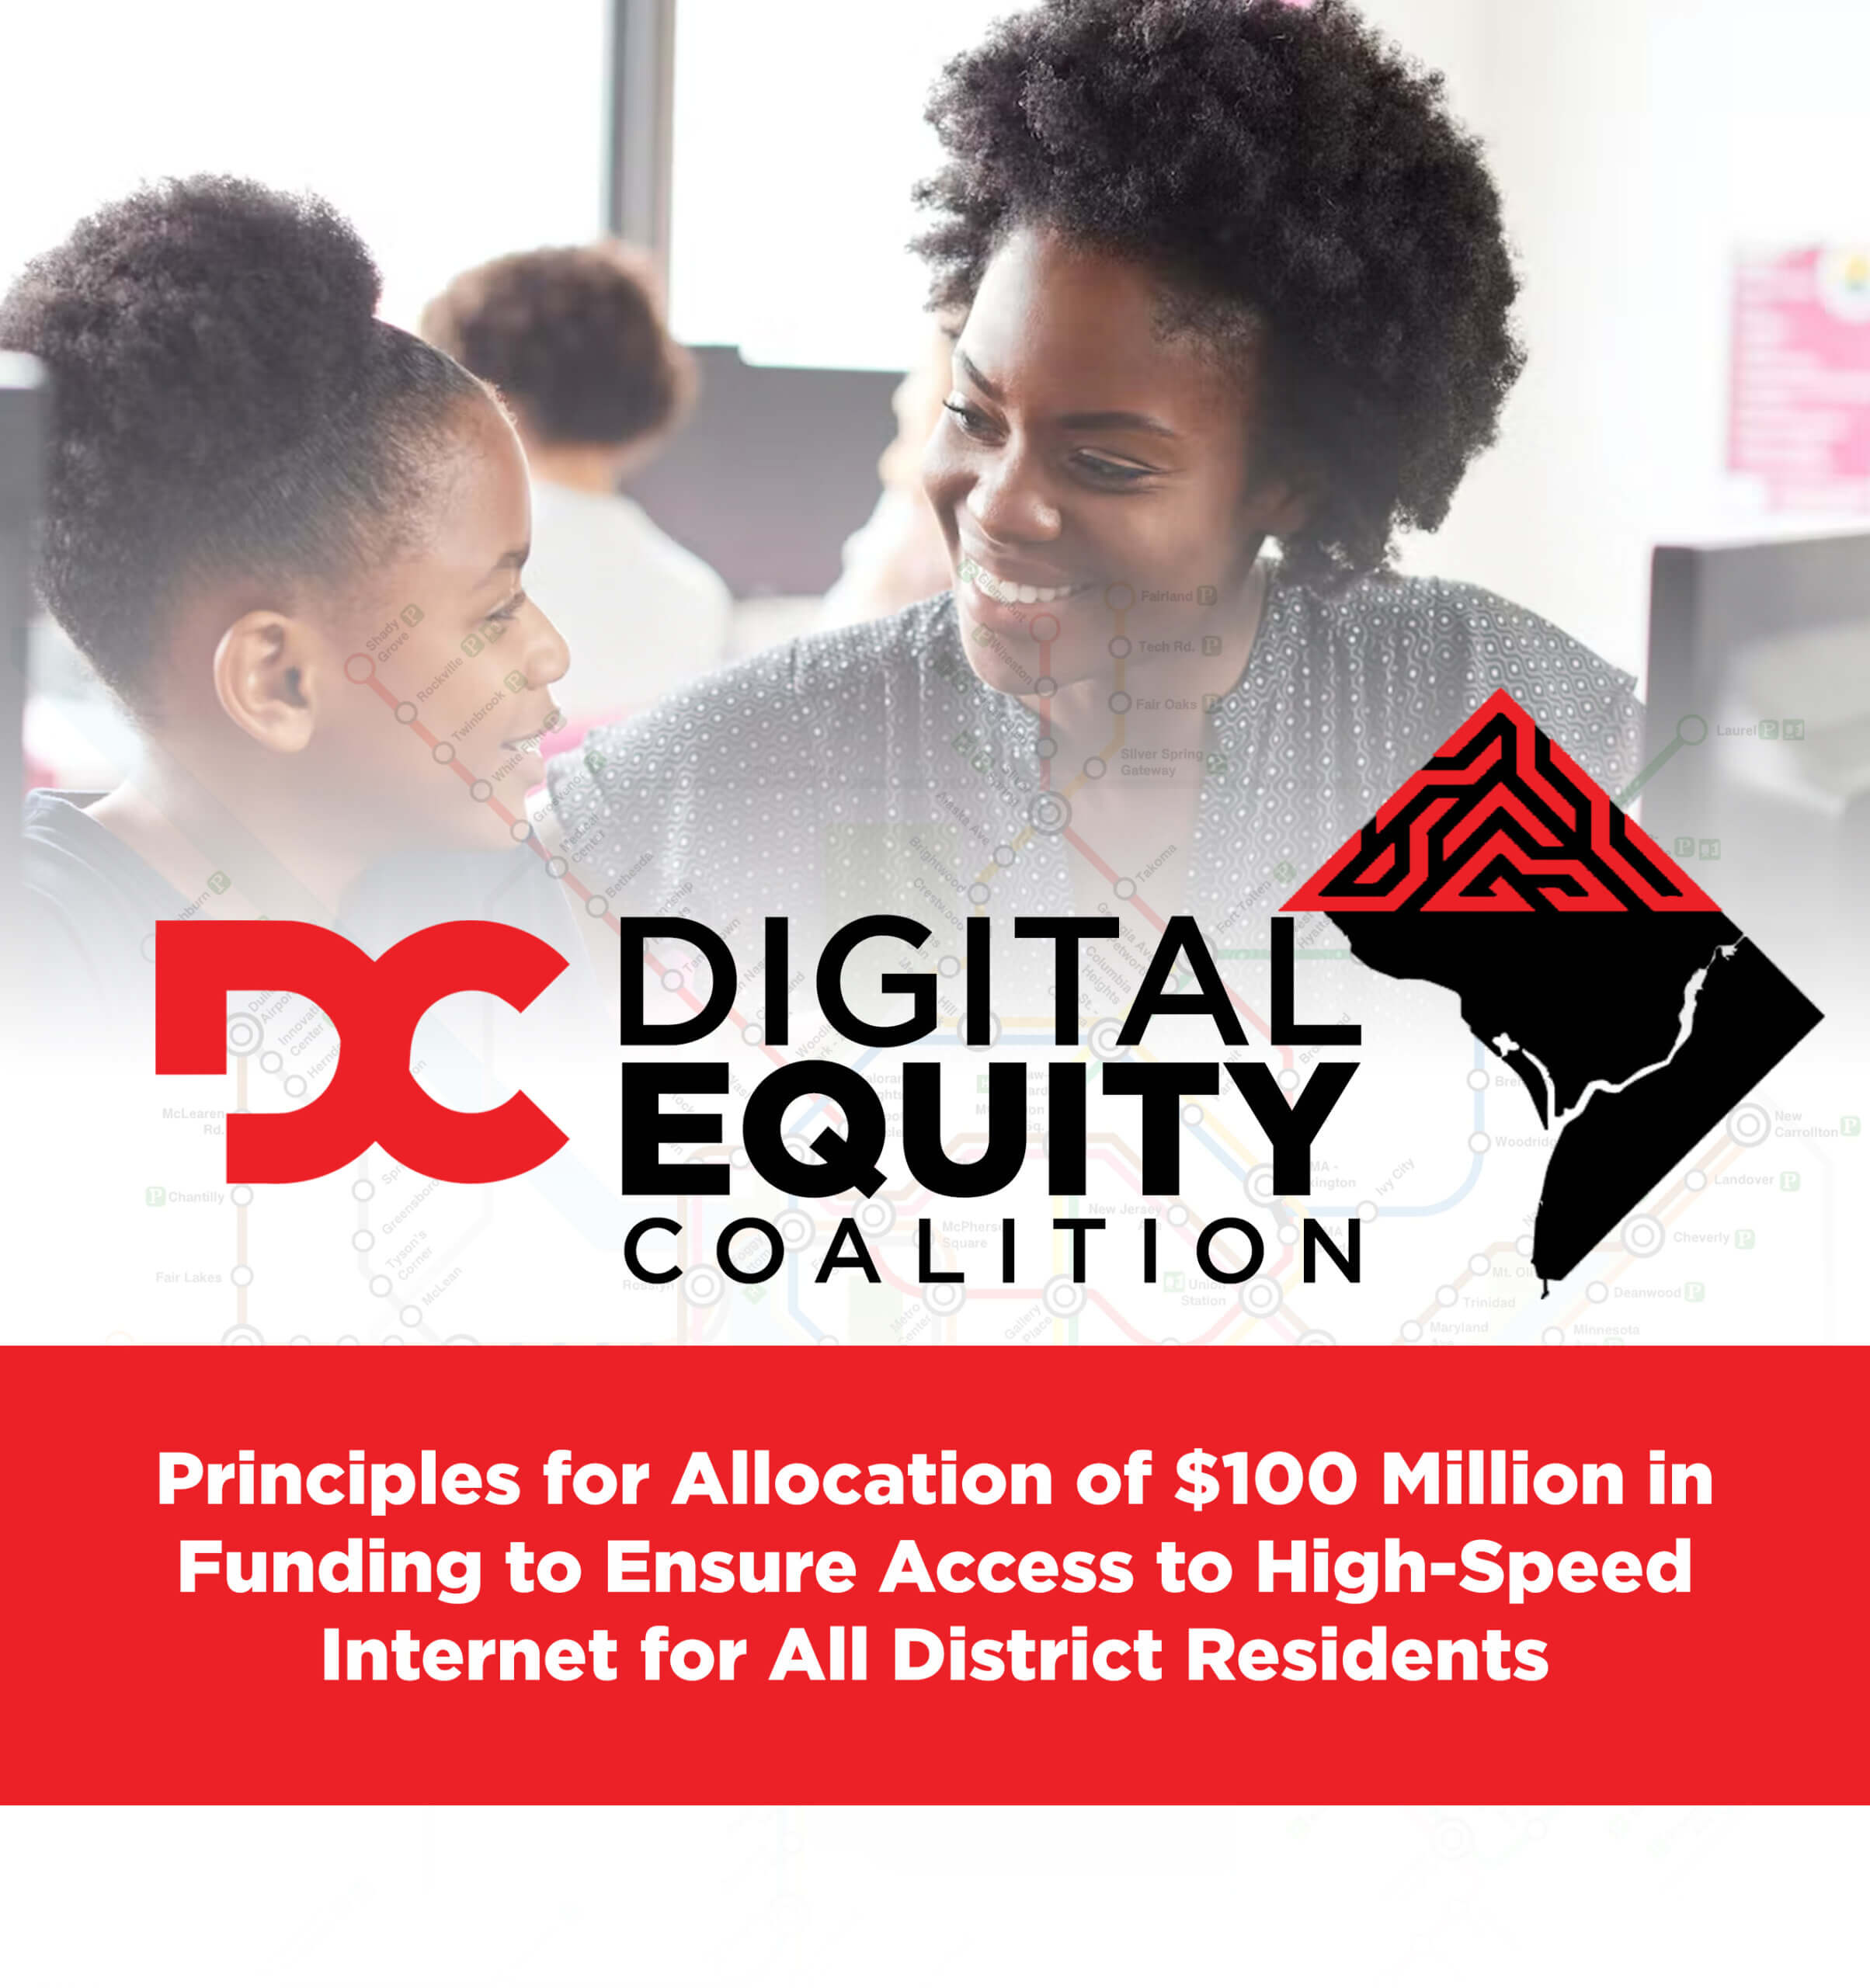 District of Columbia Digital Equity Coalition Announces Principles for Allocation of $100 Million in Funding to Ensure Access to High-Speed Internet for All District Residents